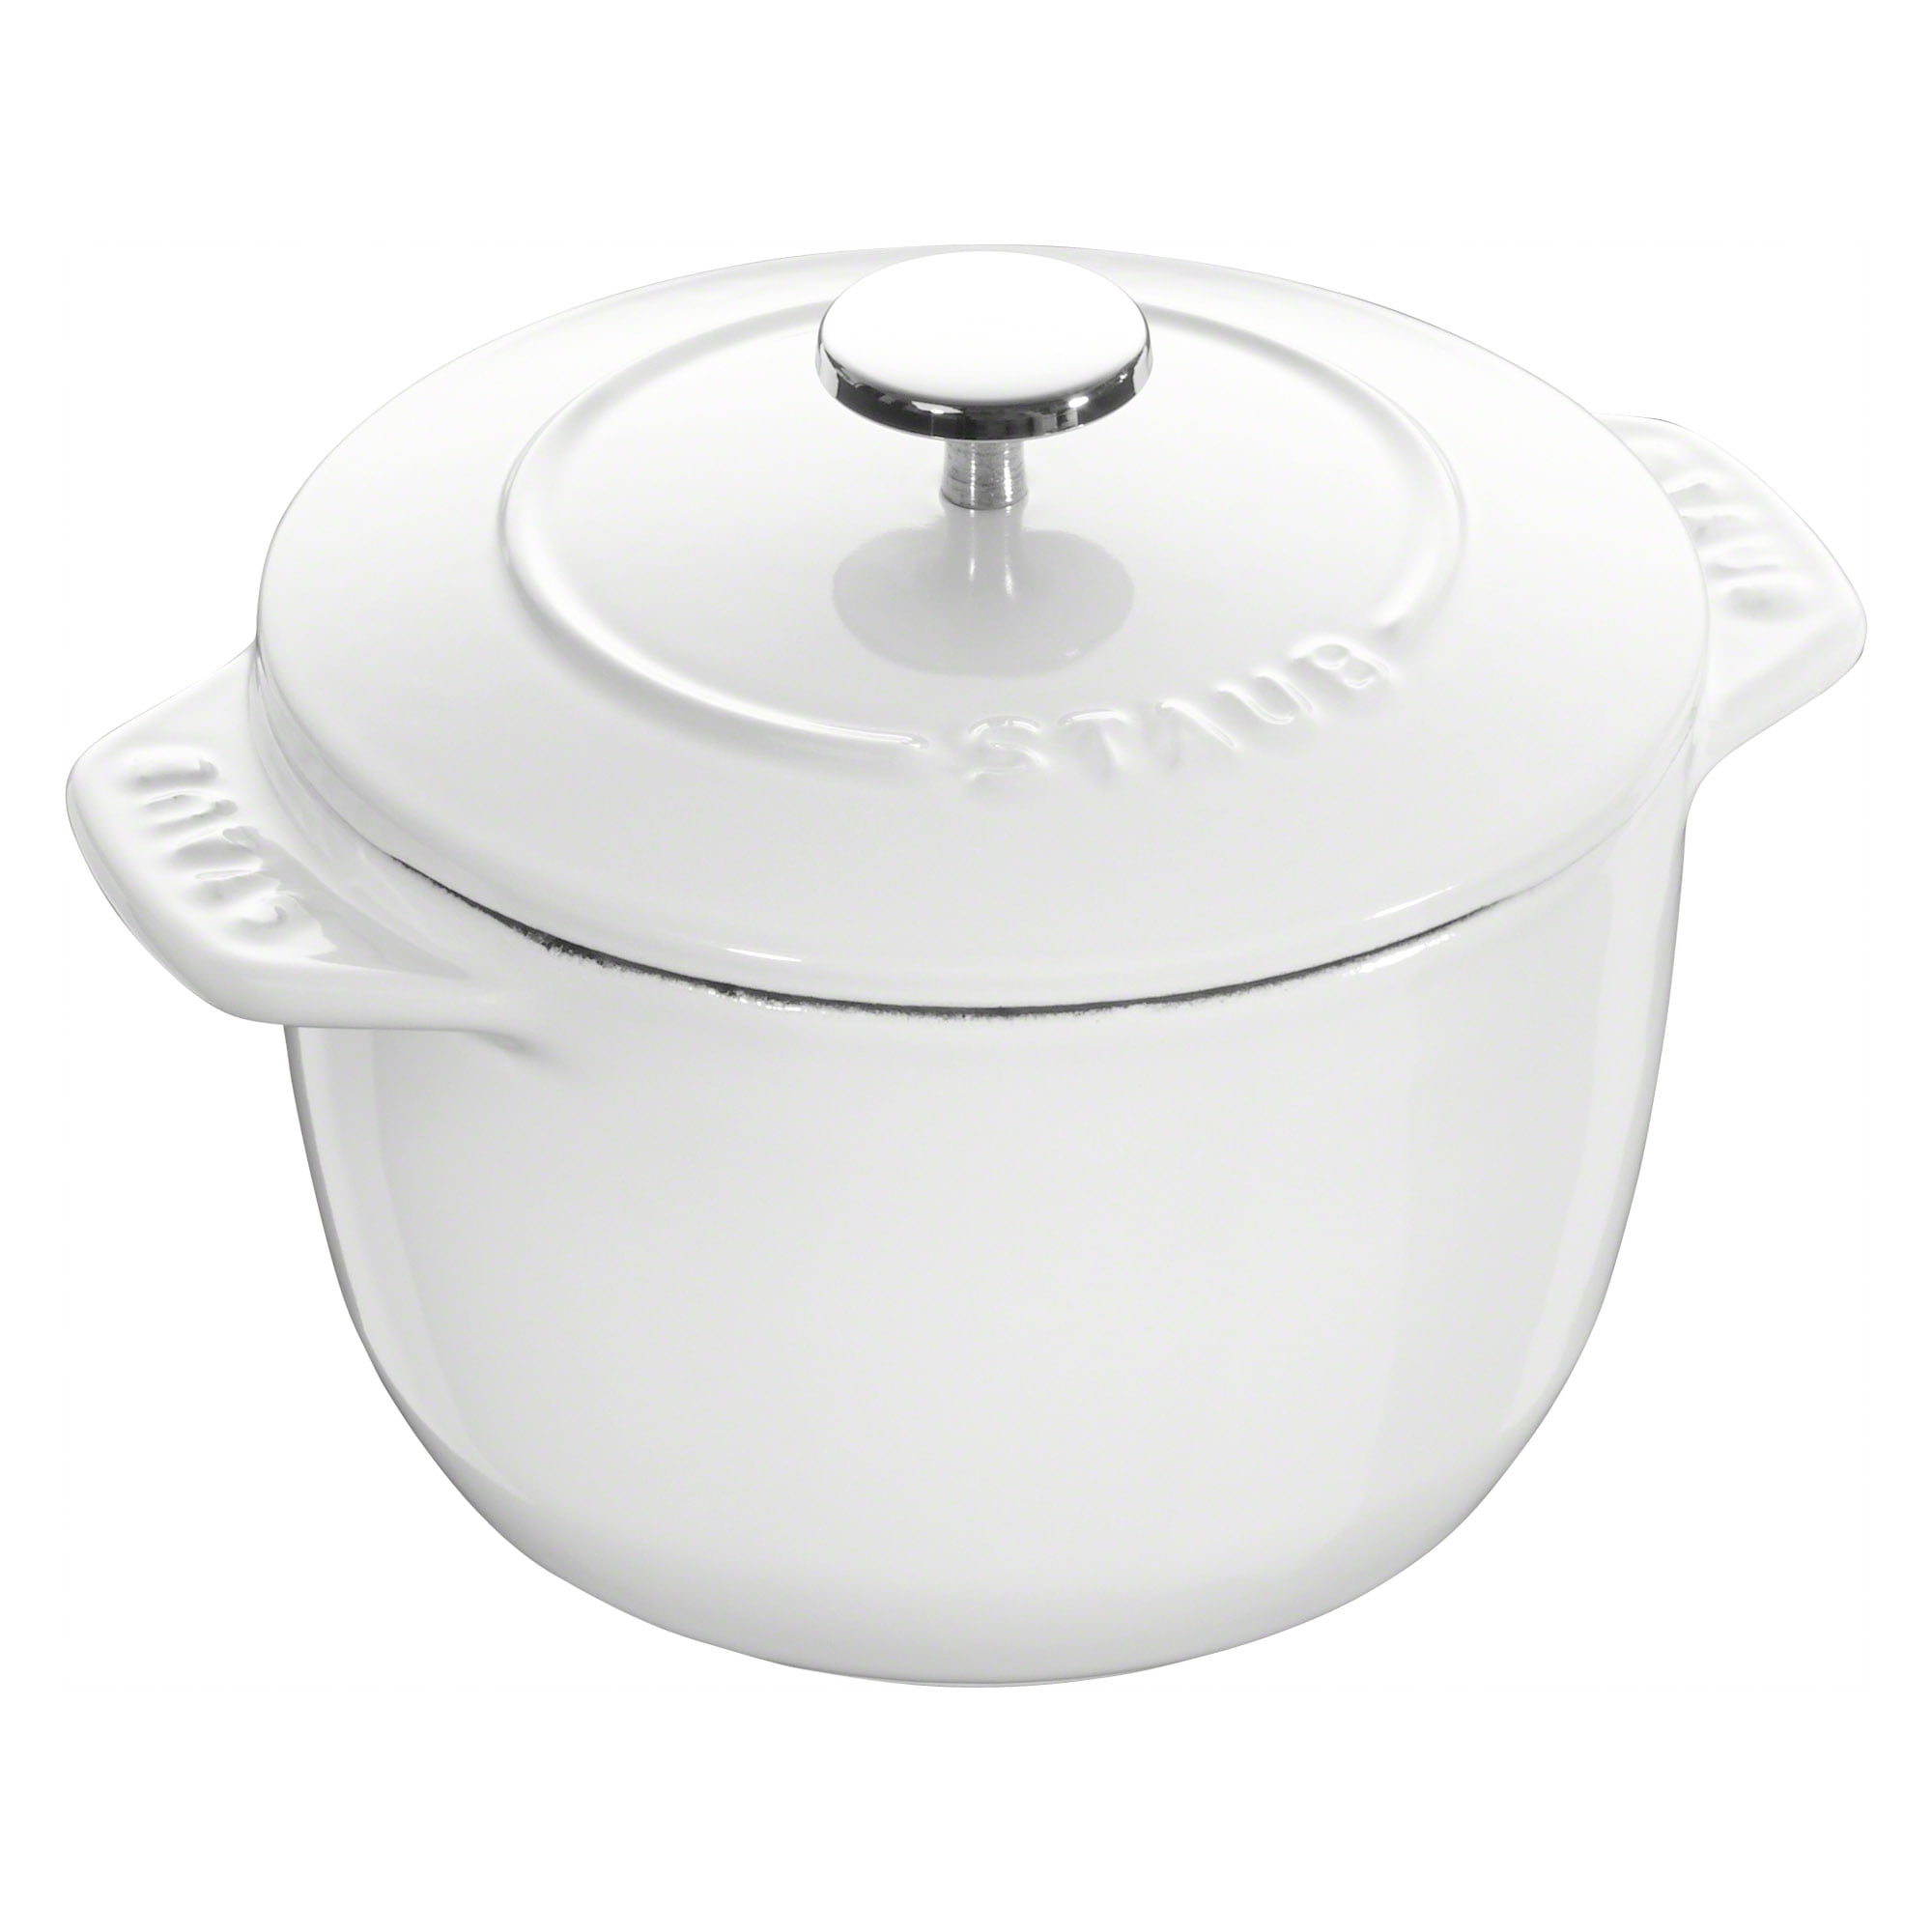 Food52 x Staub Petite French Oven Stovetop Rice Cooker, 1.5QT